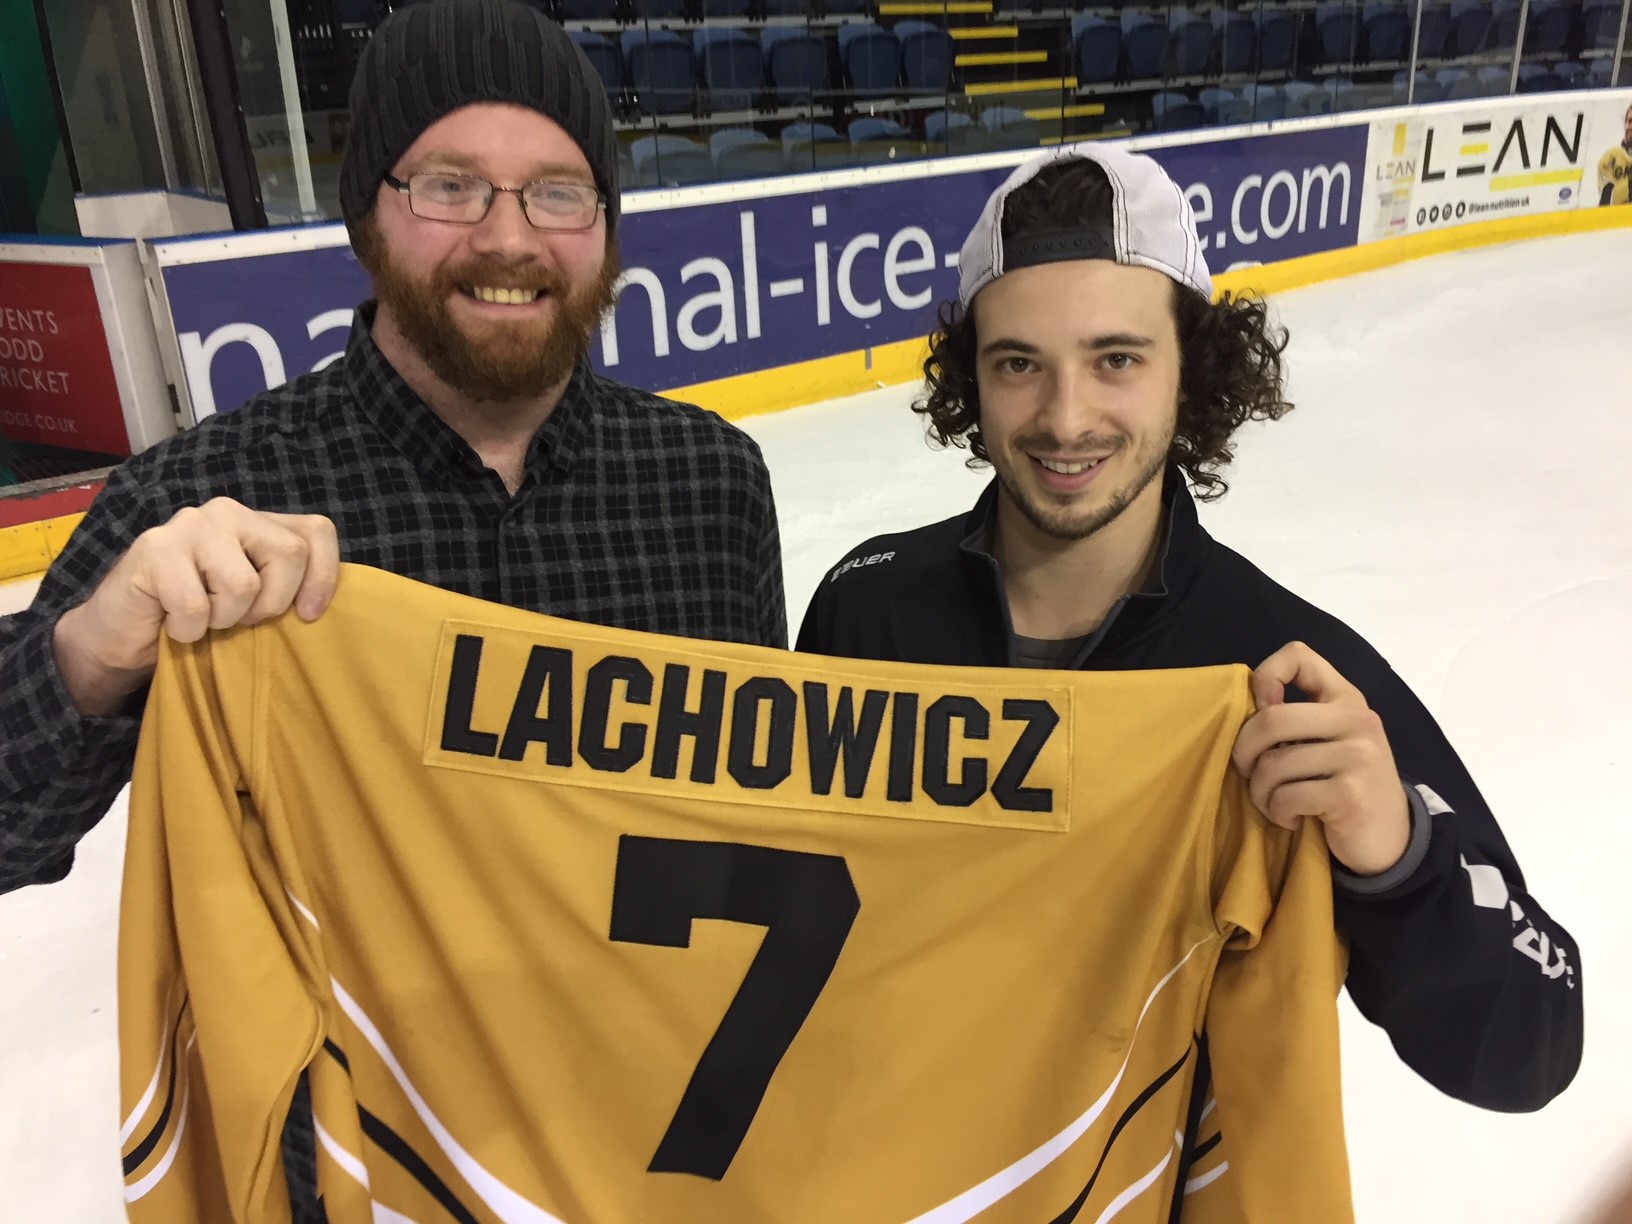 First year fan wins Lacho's shirt Top Image